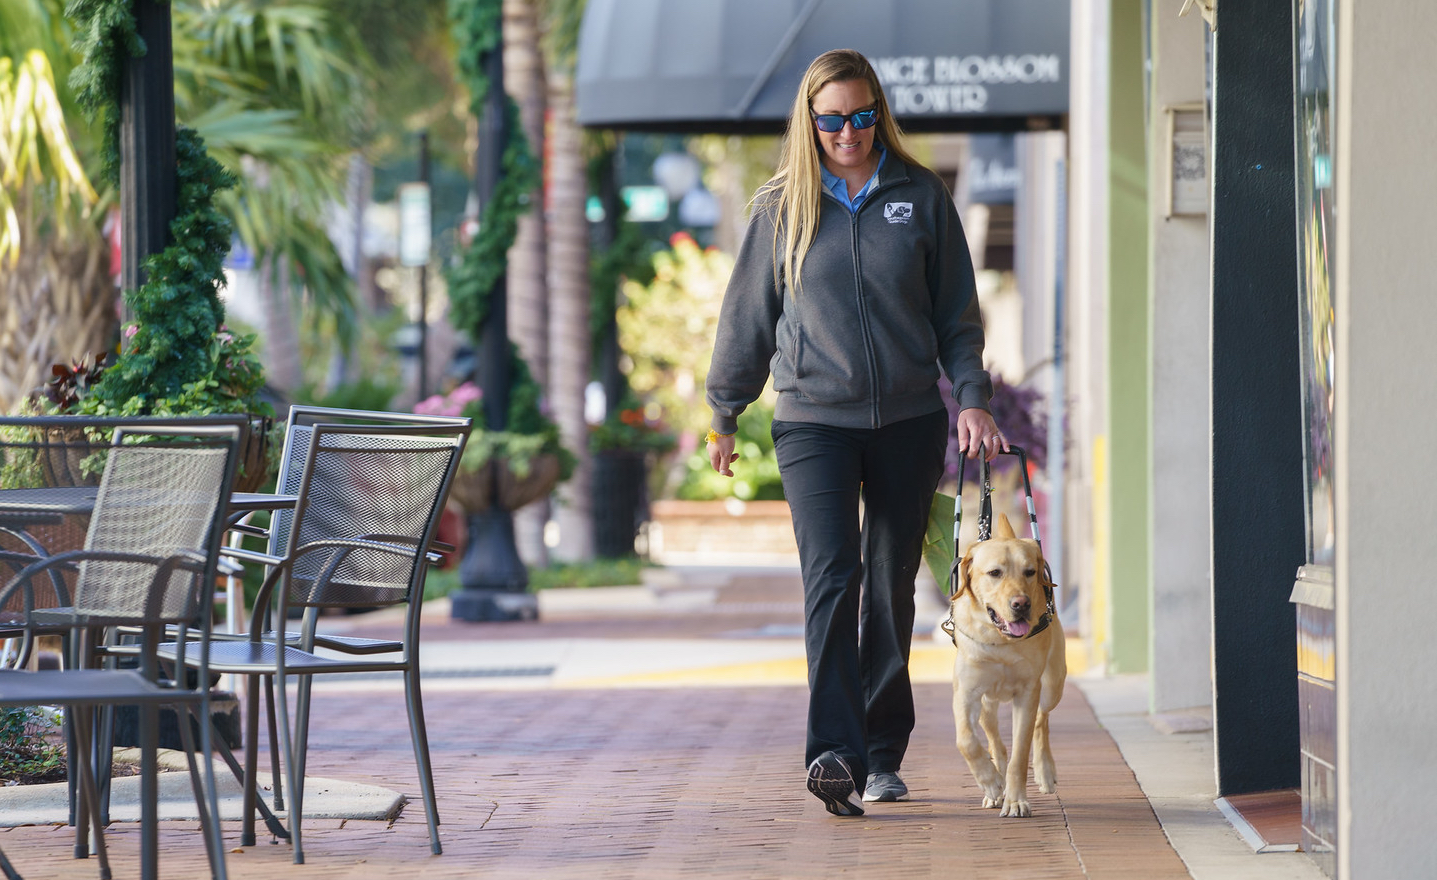 Trainer walks towards camera with guide dog in harness